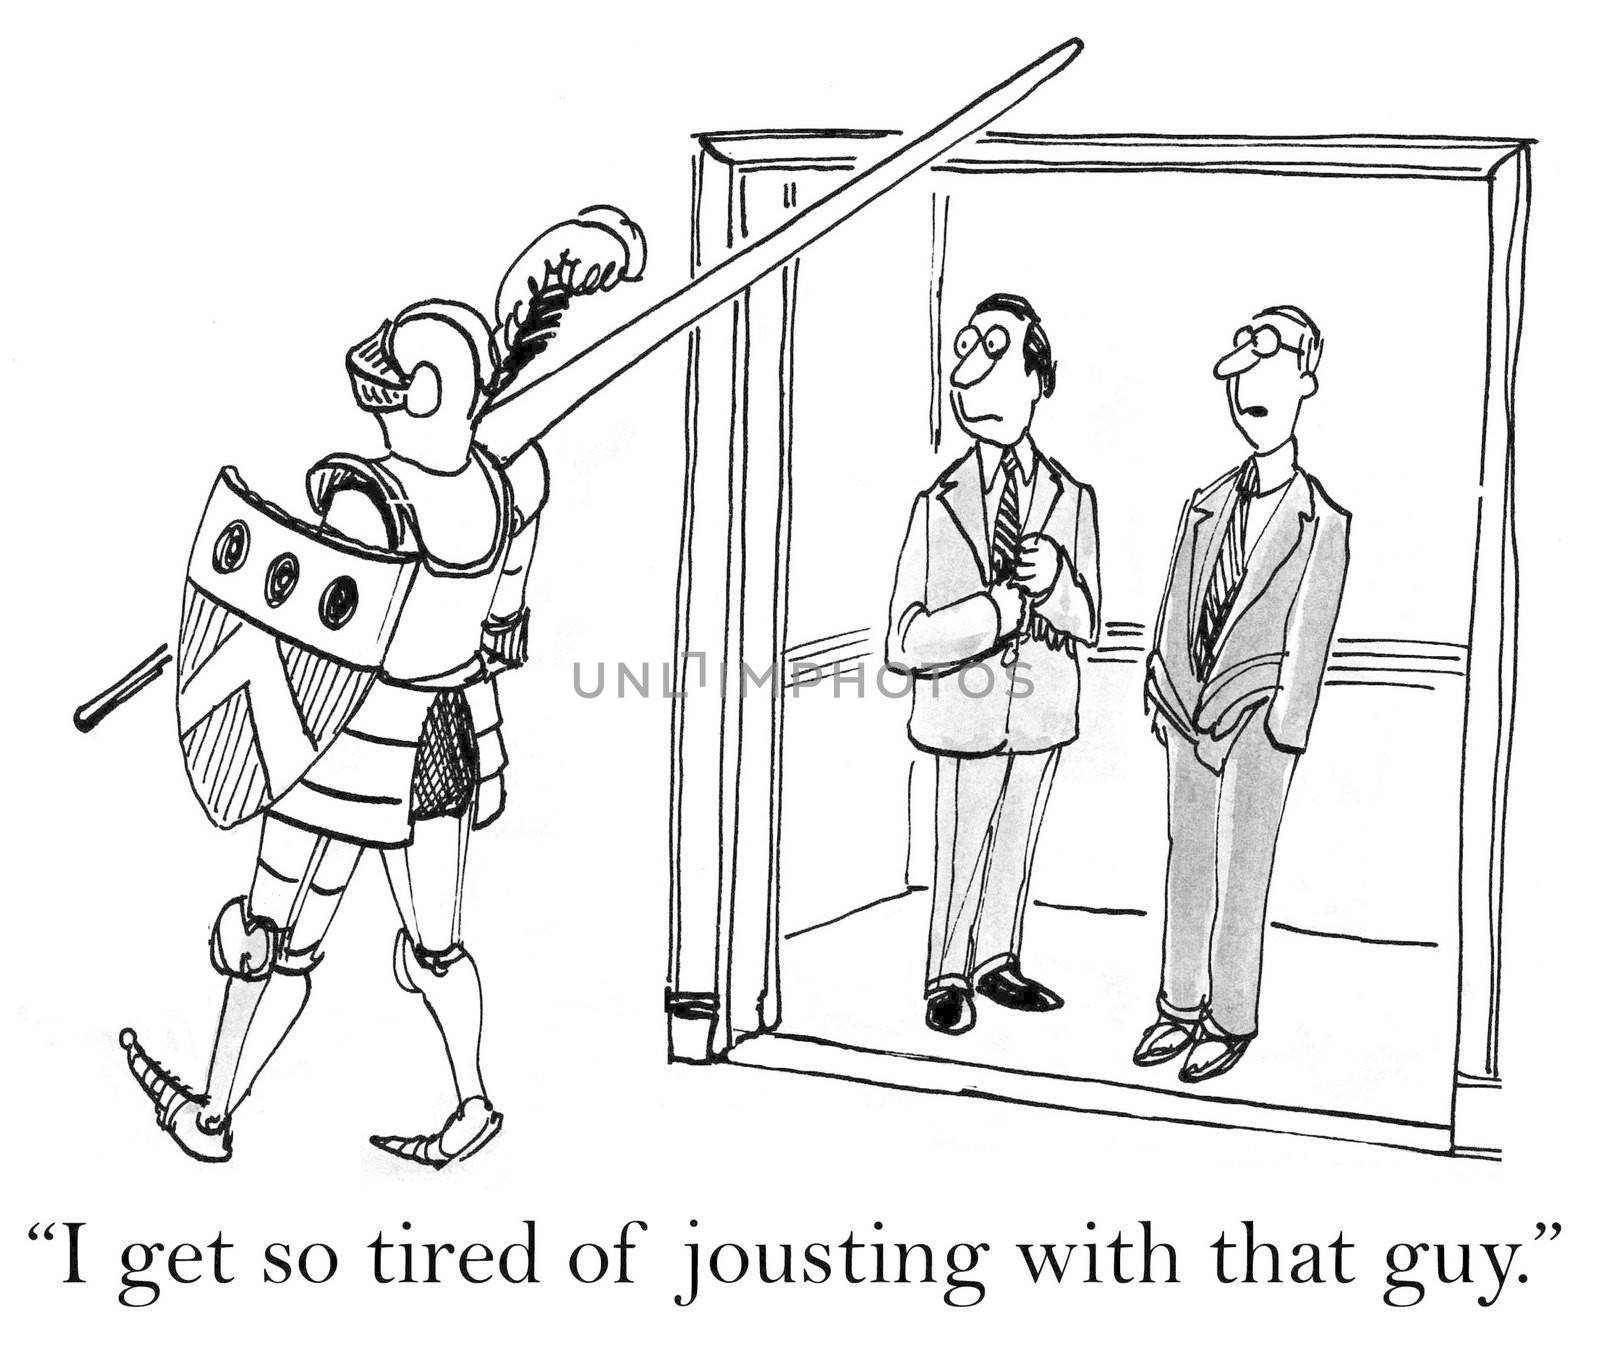 "I get so tired of jousting with that guy."